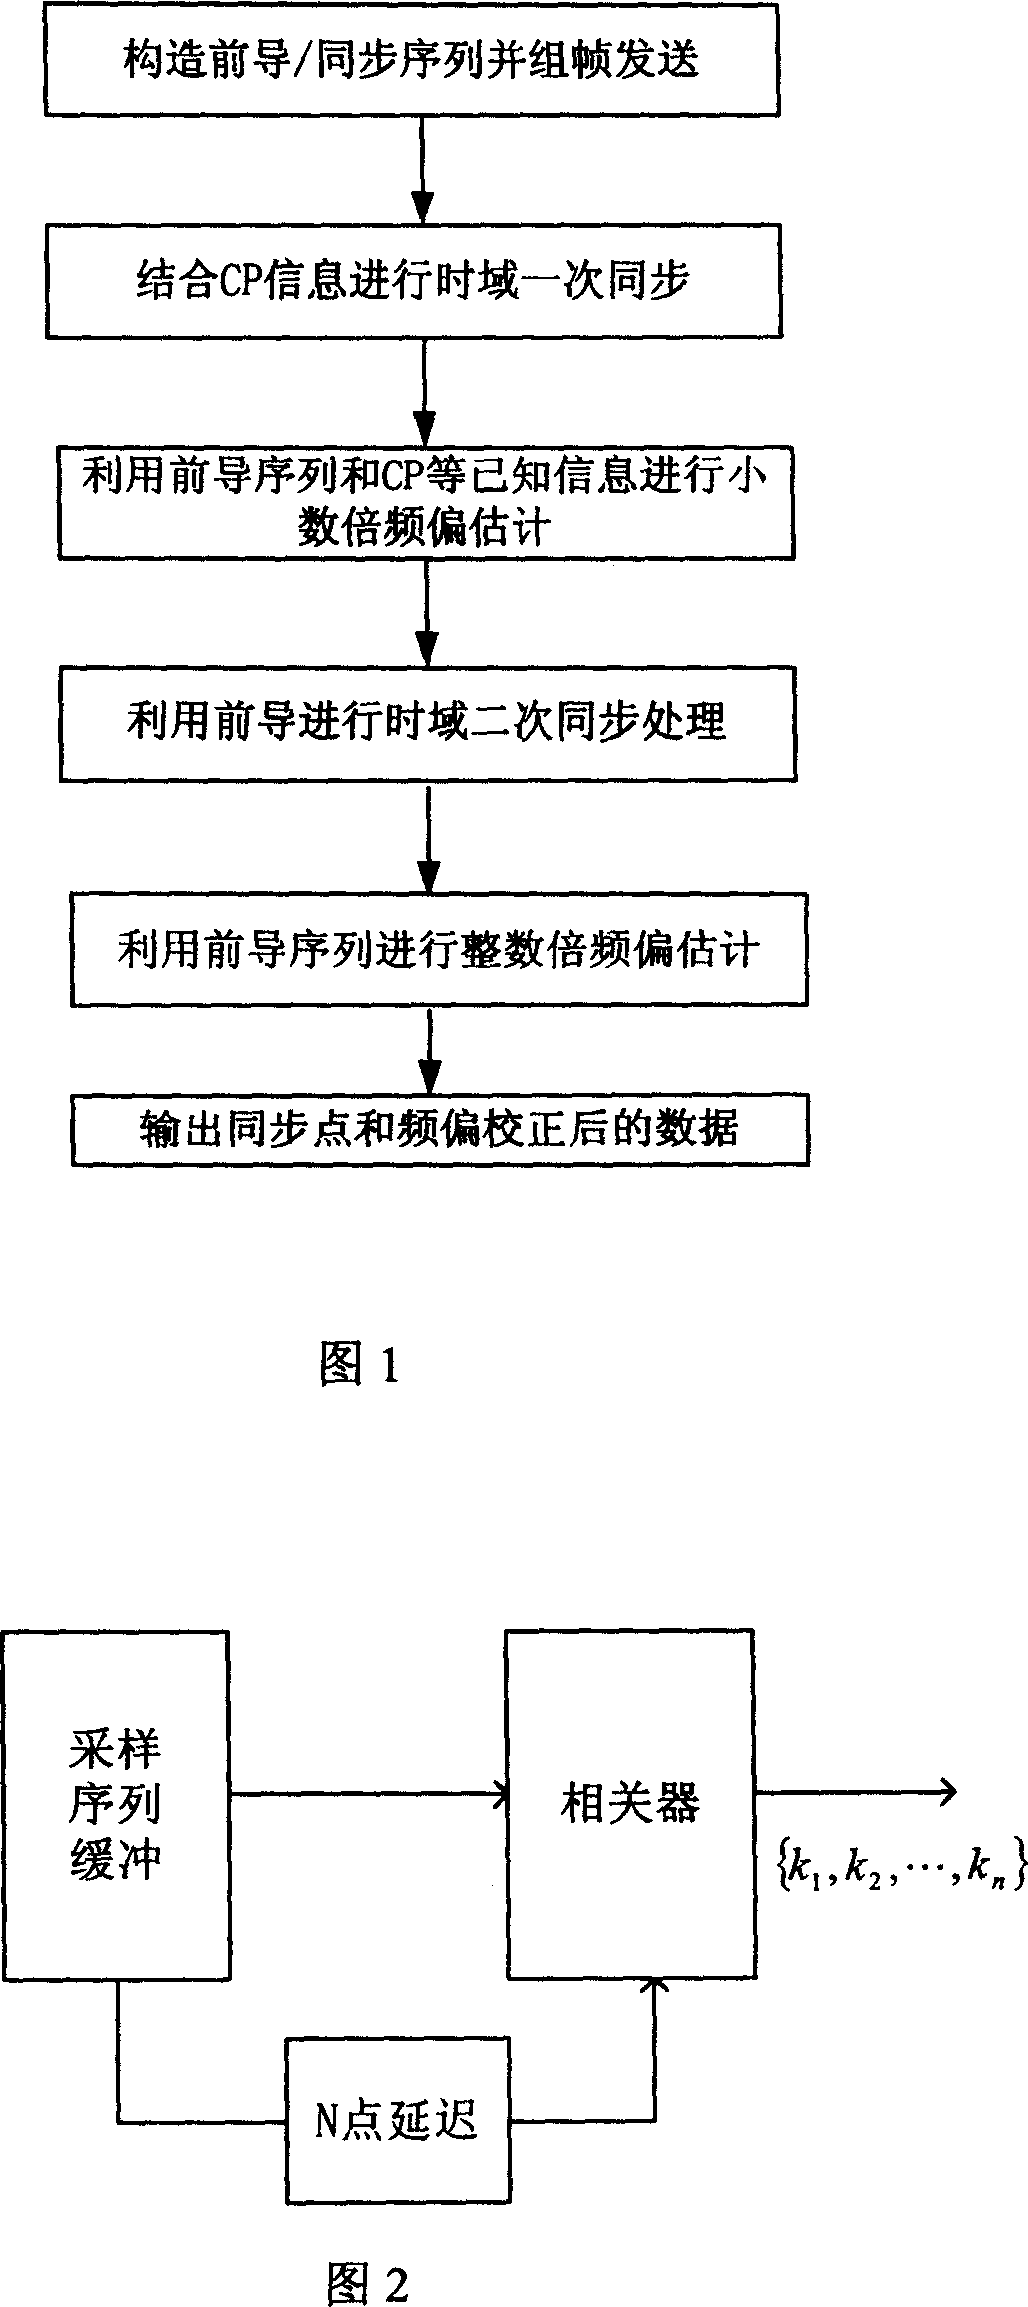 Synchronizing method for orthogonal frequency division multiplex system